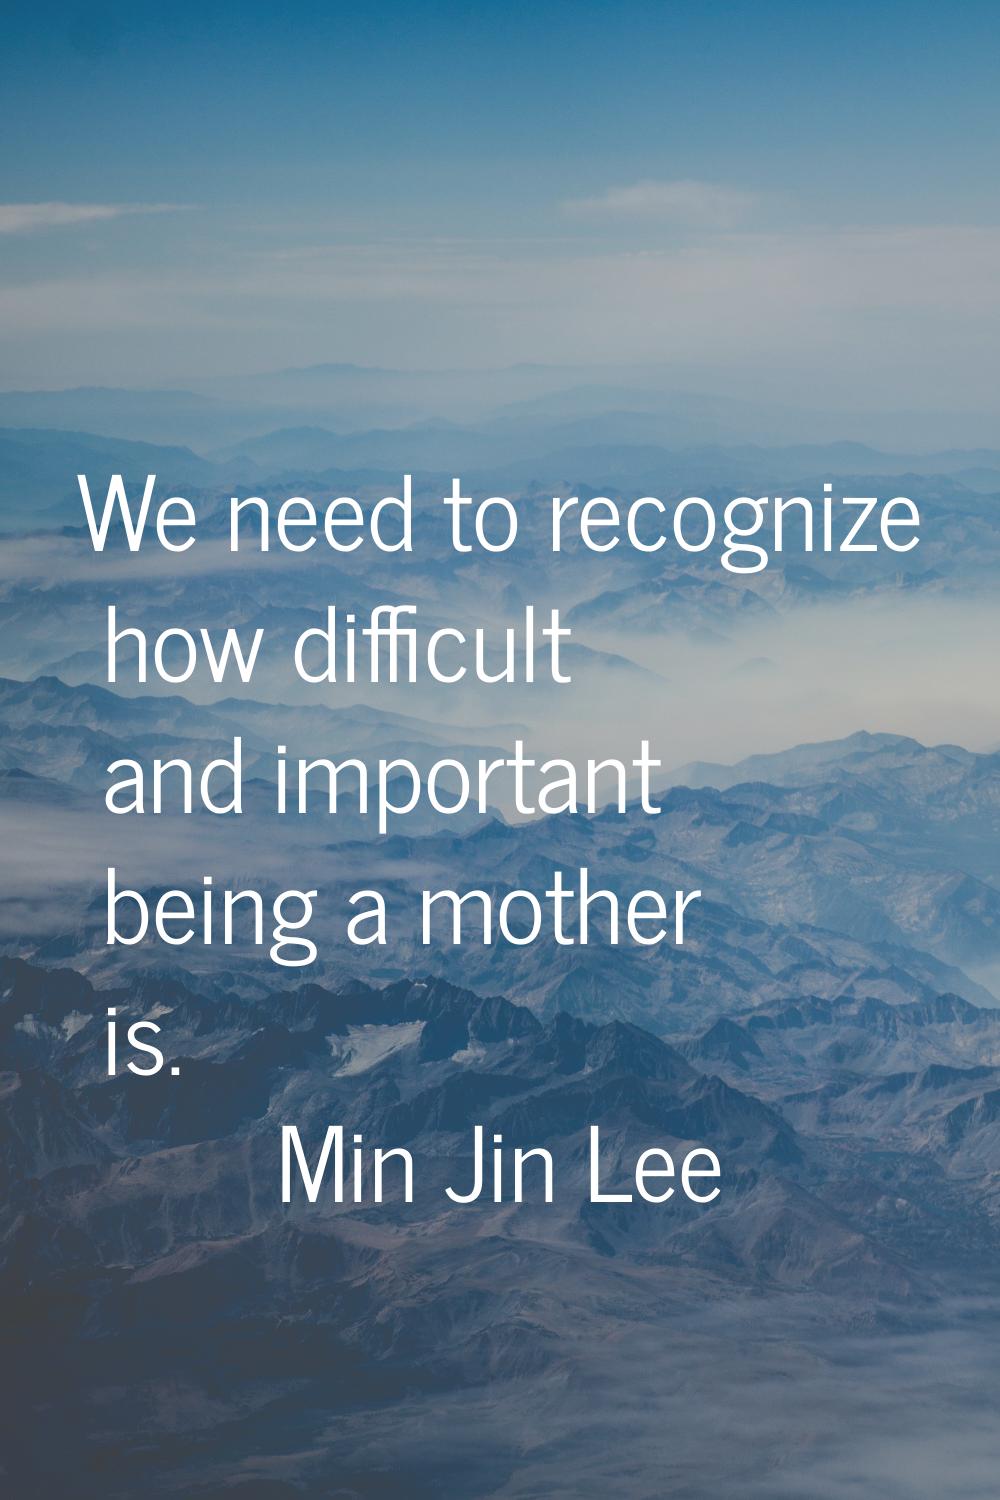 We need to recognize how difficult and important being a mother is.